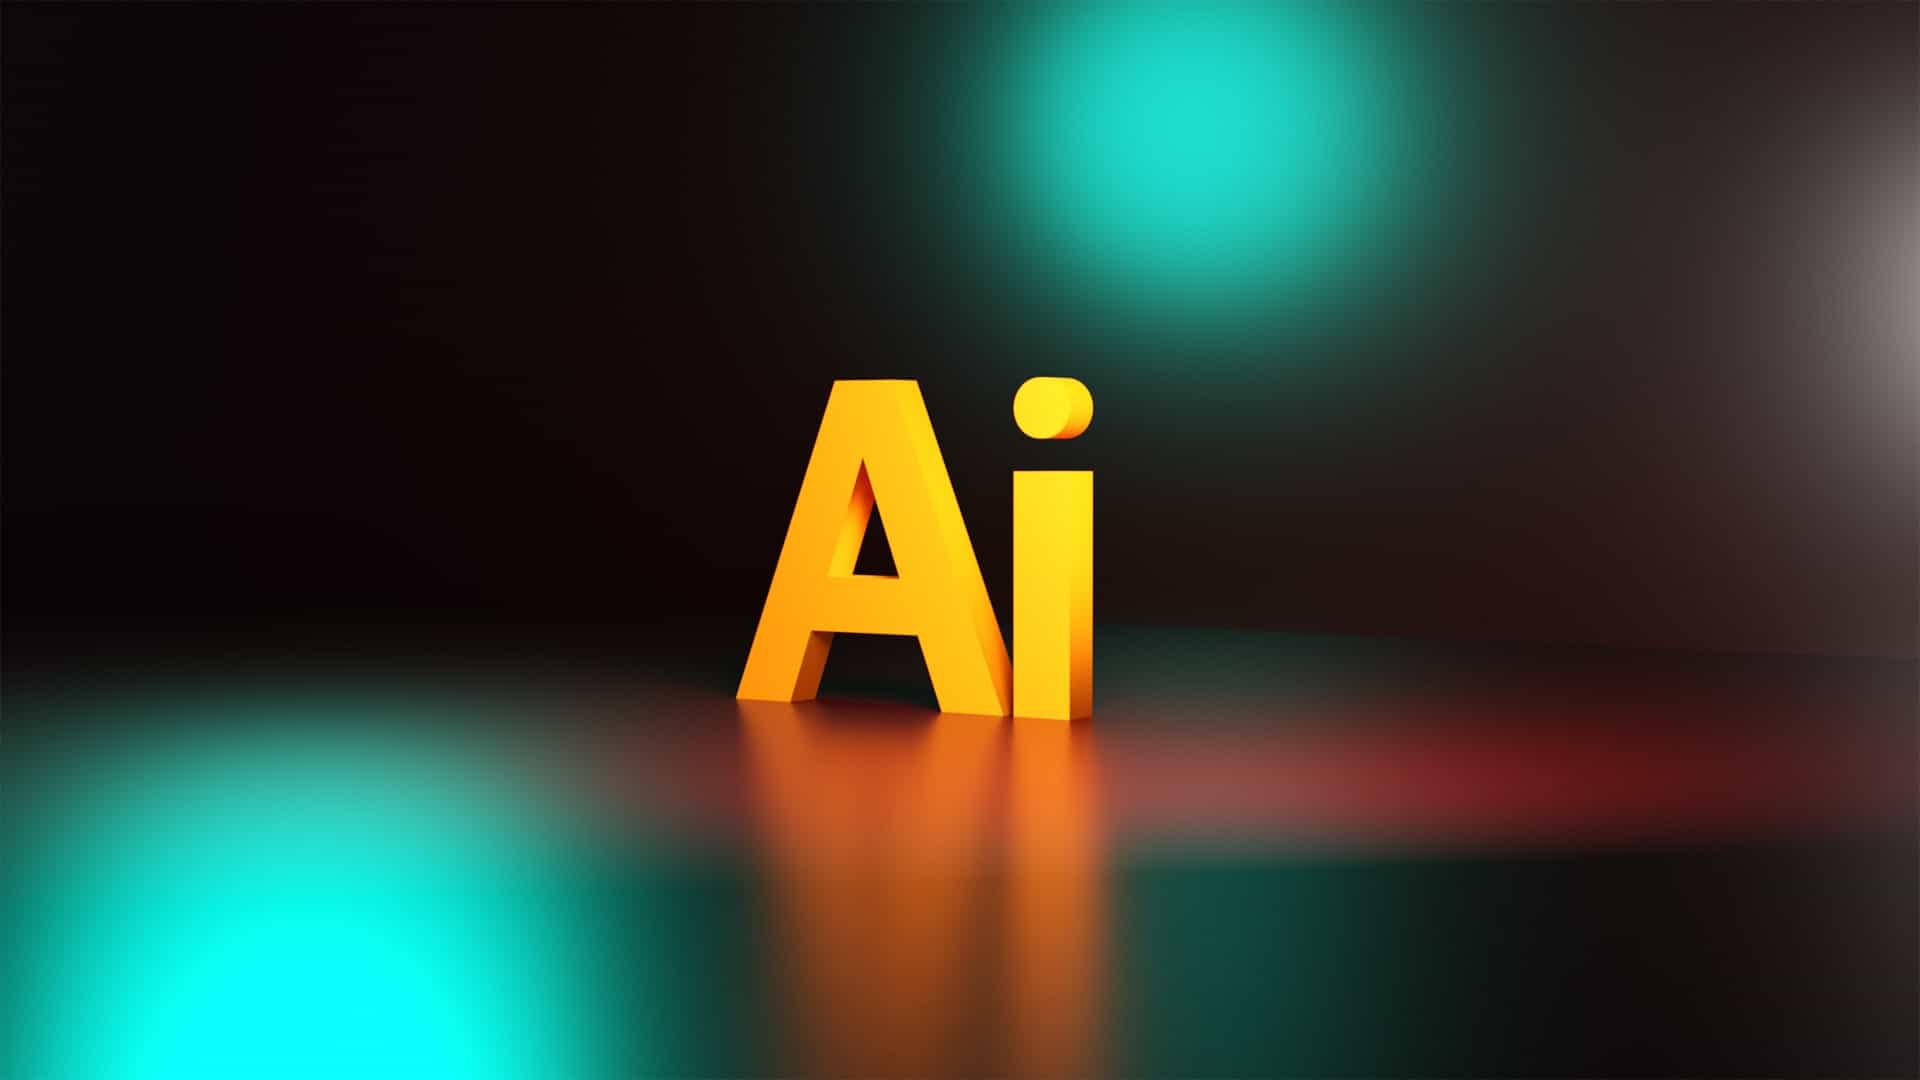 3D letters spelling out AI